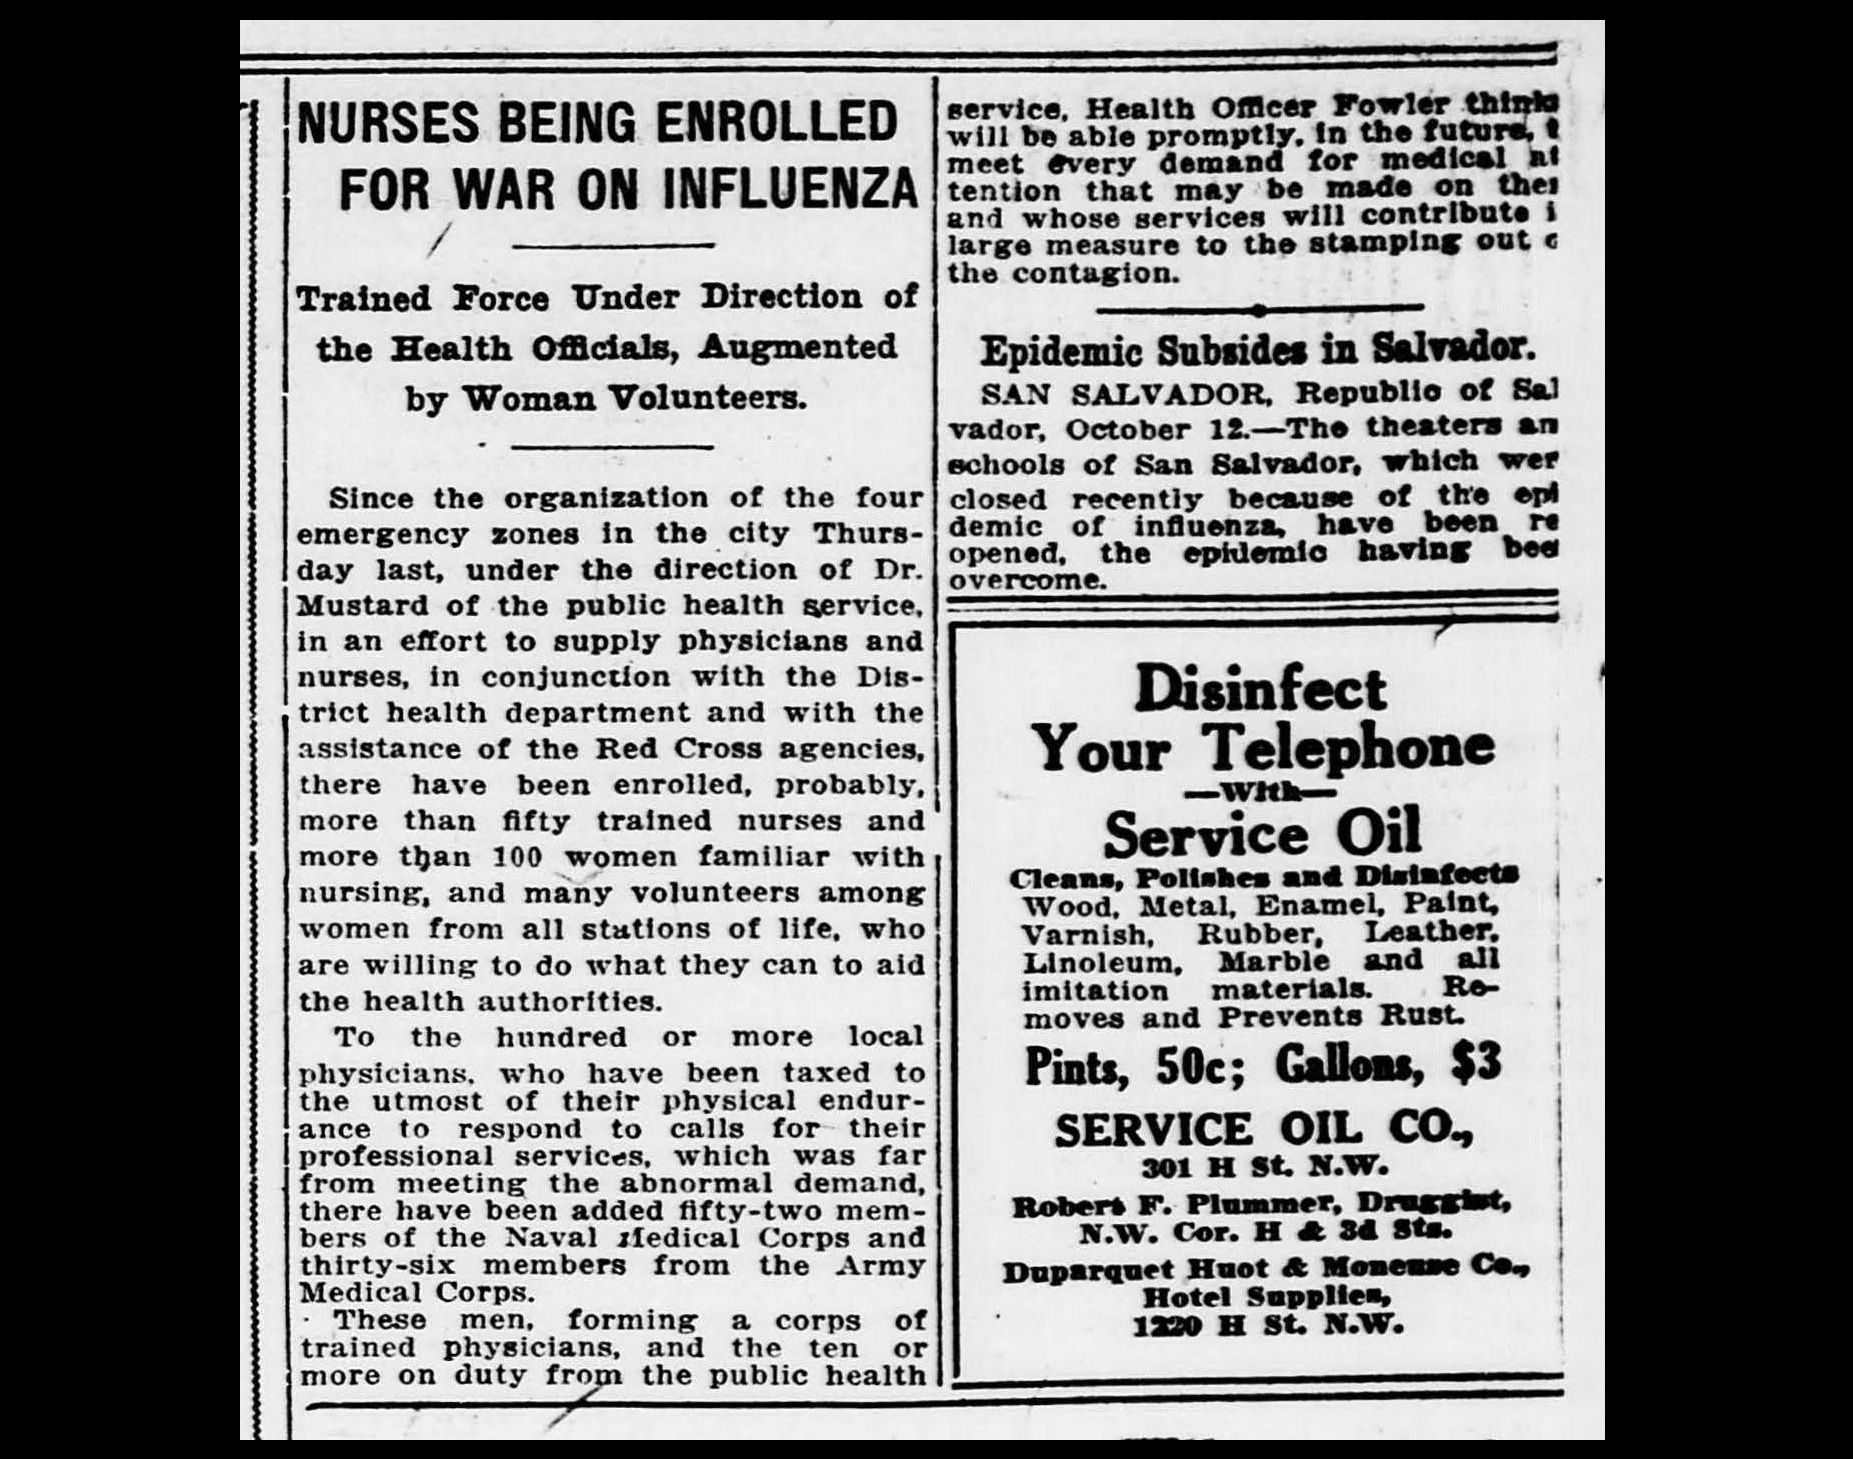 Volunteer nurses were sought for emergency zones. An enterprising druggist sold oil to disinfect (and polish!) telephones.